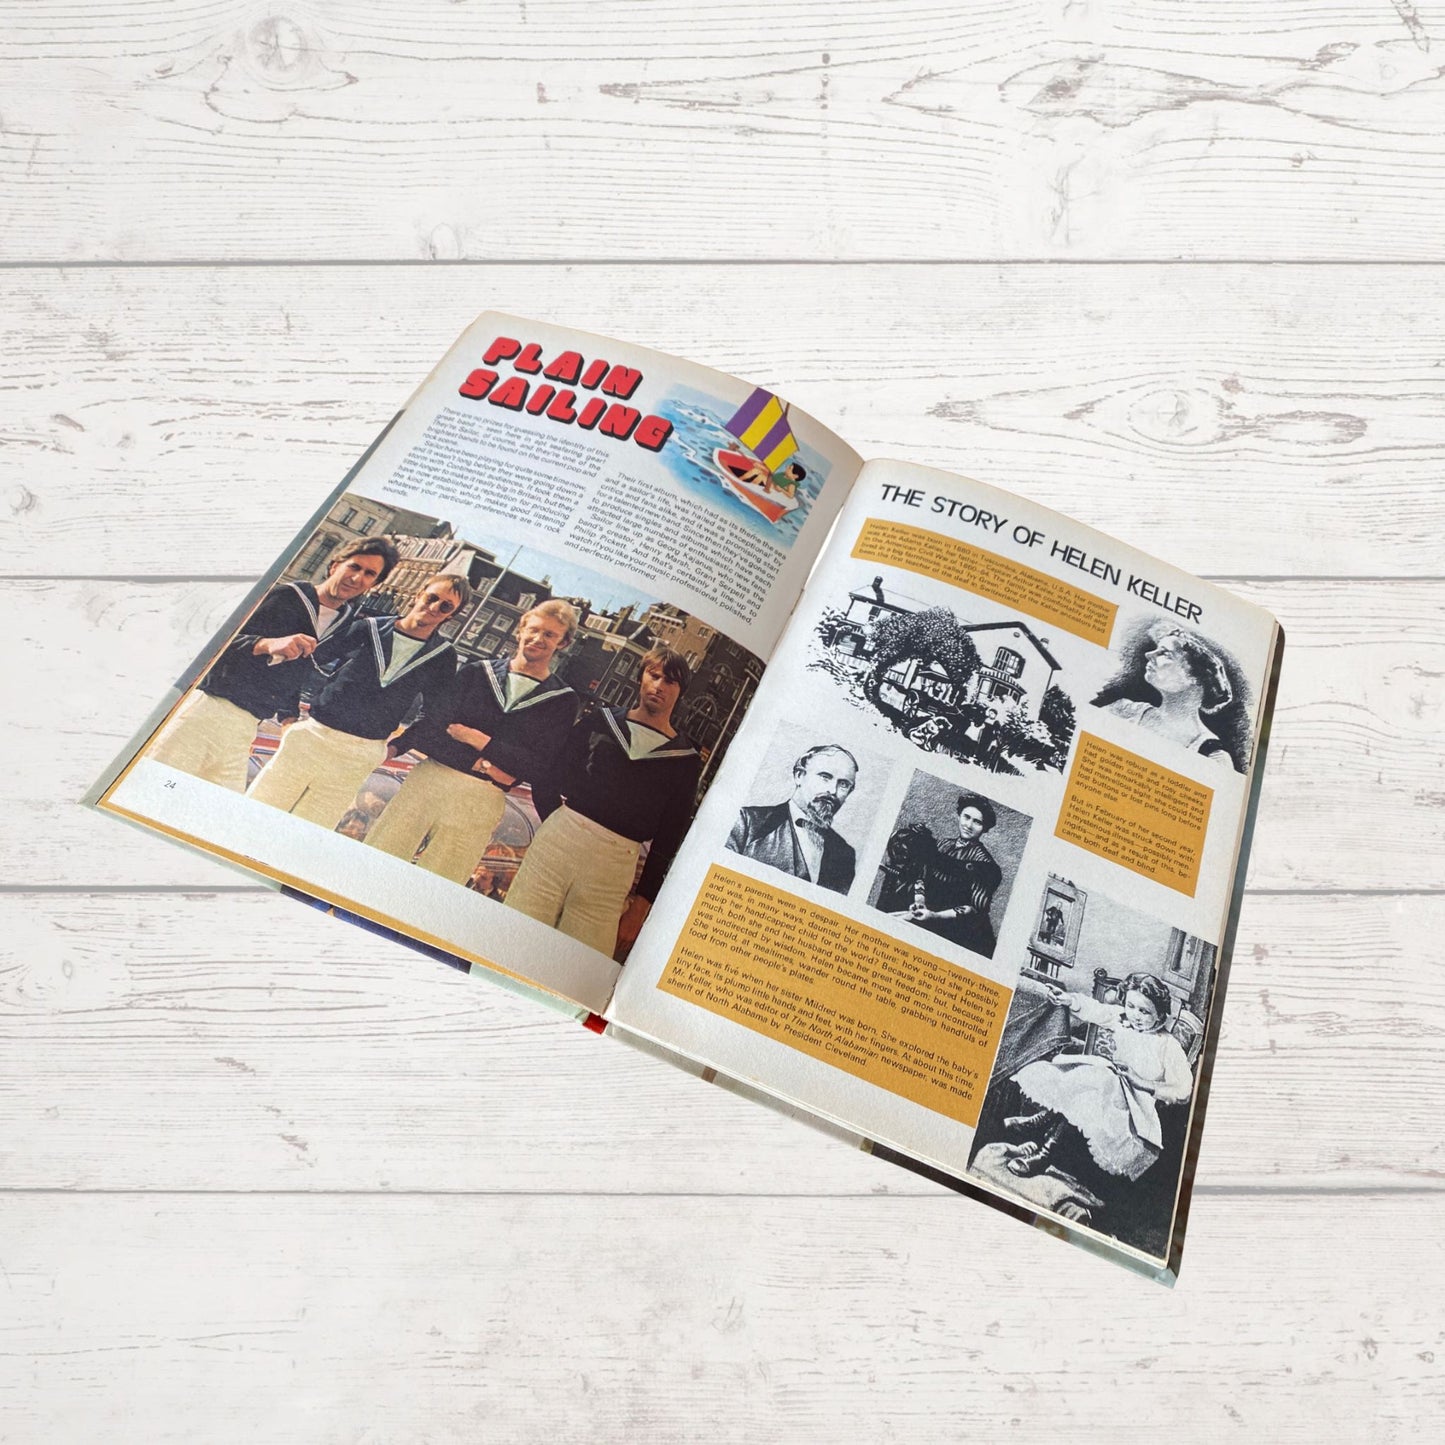 Vintage Schoolgirls’ Annual 1978, full of fiction, fun, pop and beauty. Great gift idea